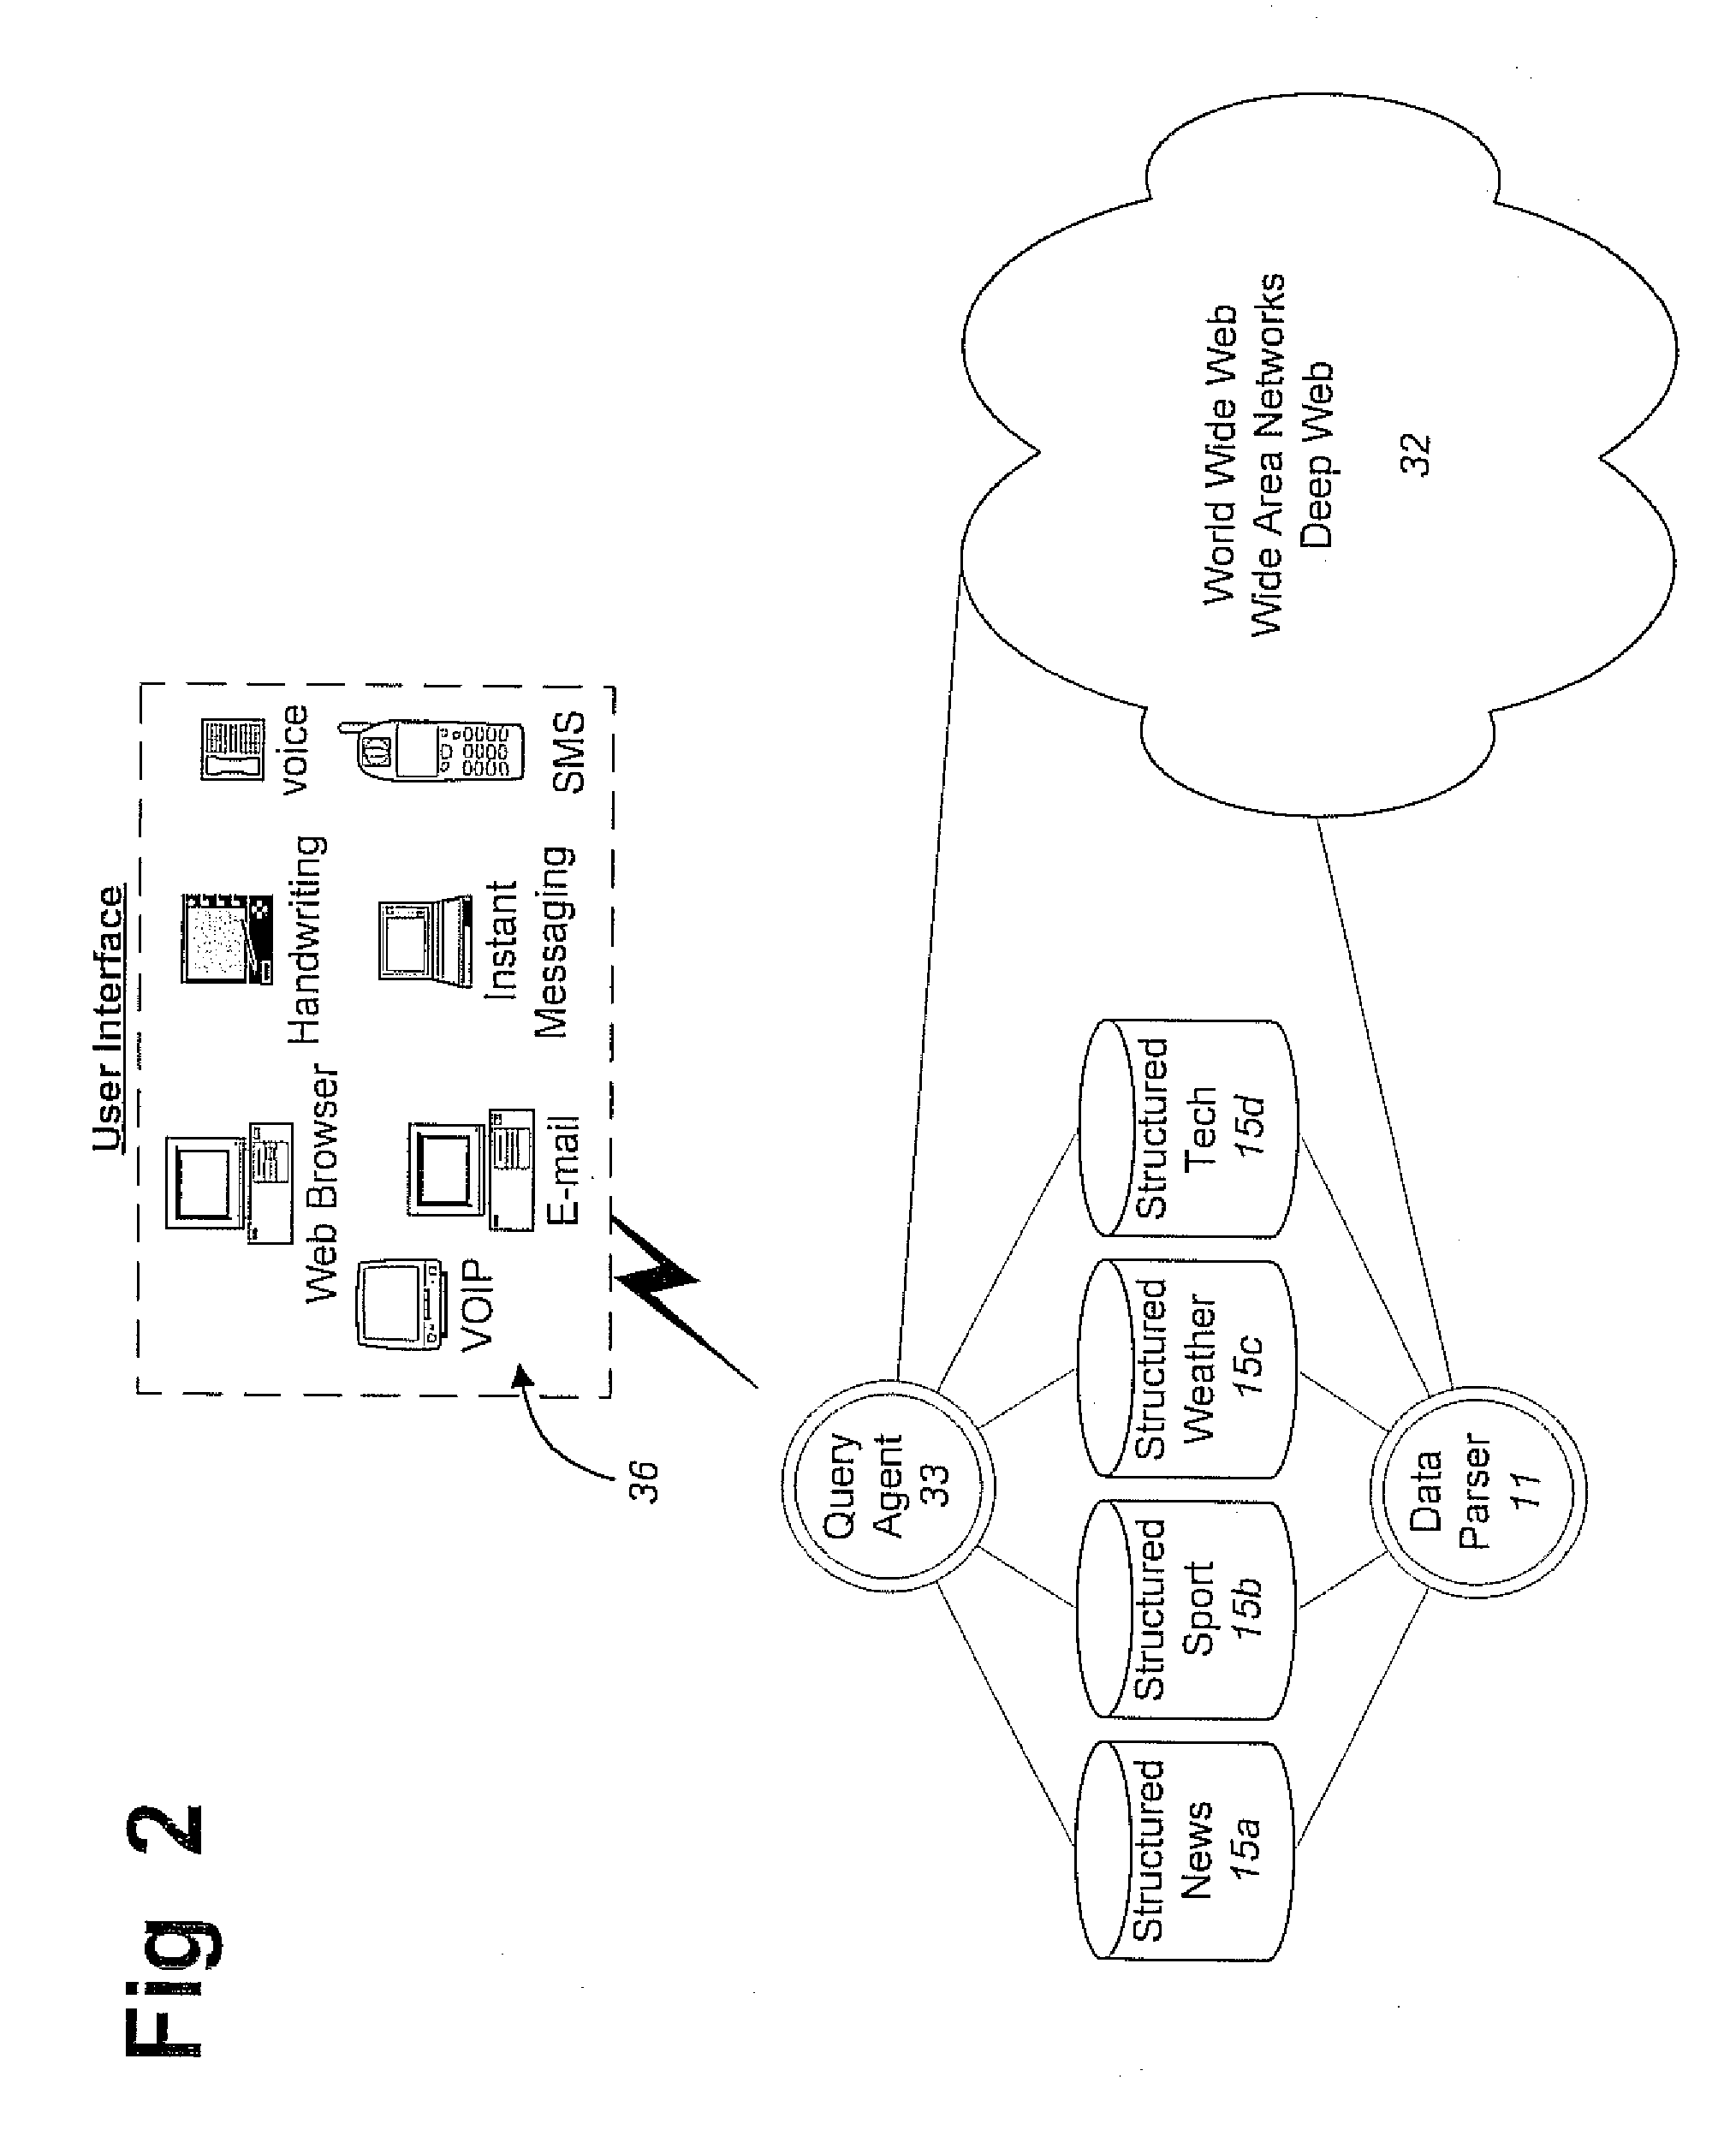 Novel systems and methods for performing contextual information retrieval